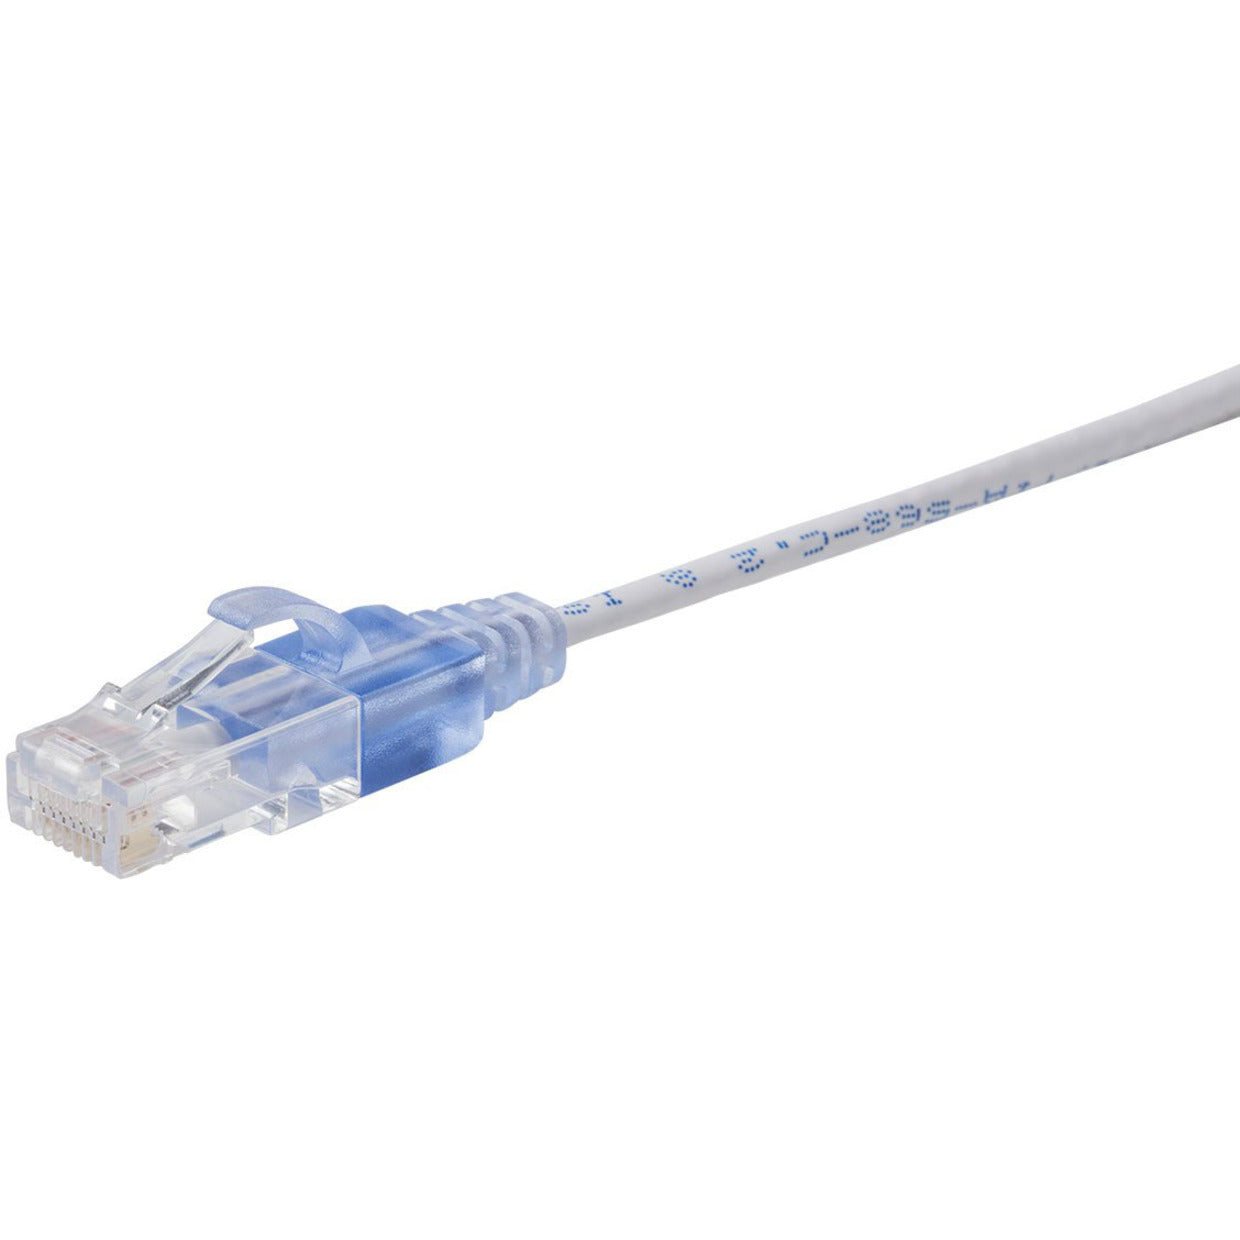 Monoprice 15152 SlimRun Cat6A Ethernet Network Patch Cable 1ft White, 10-Pack